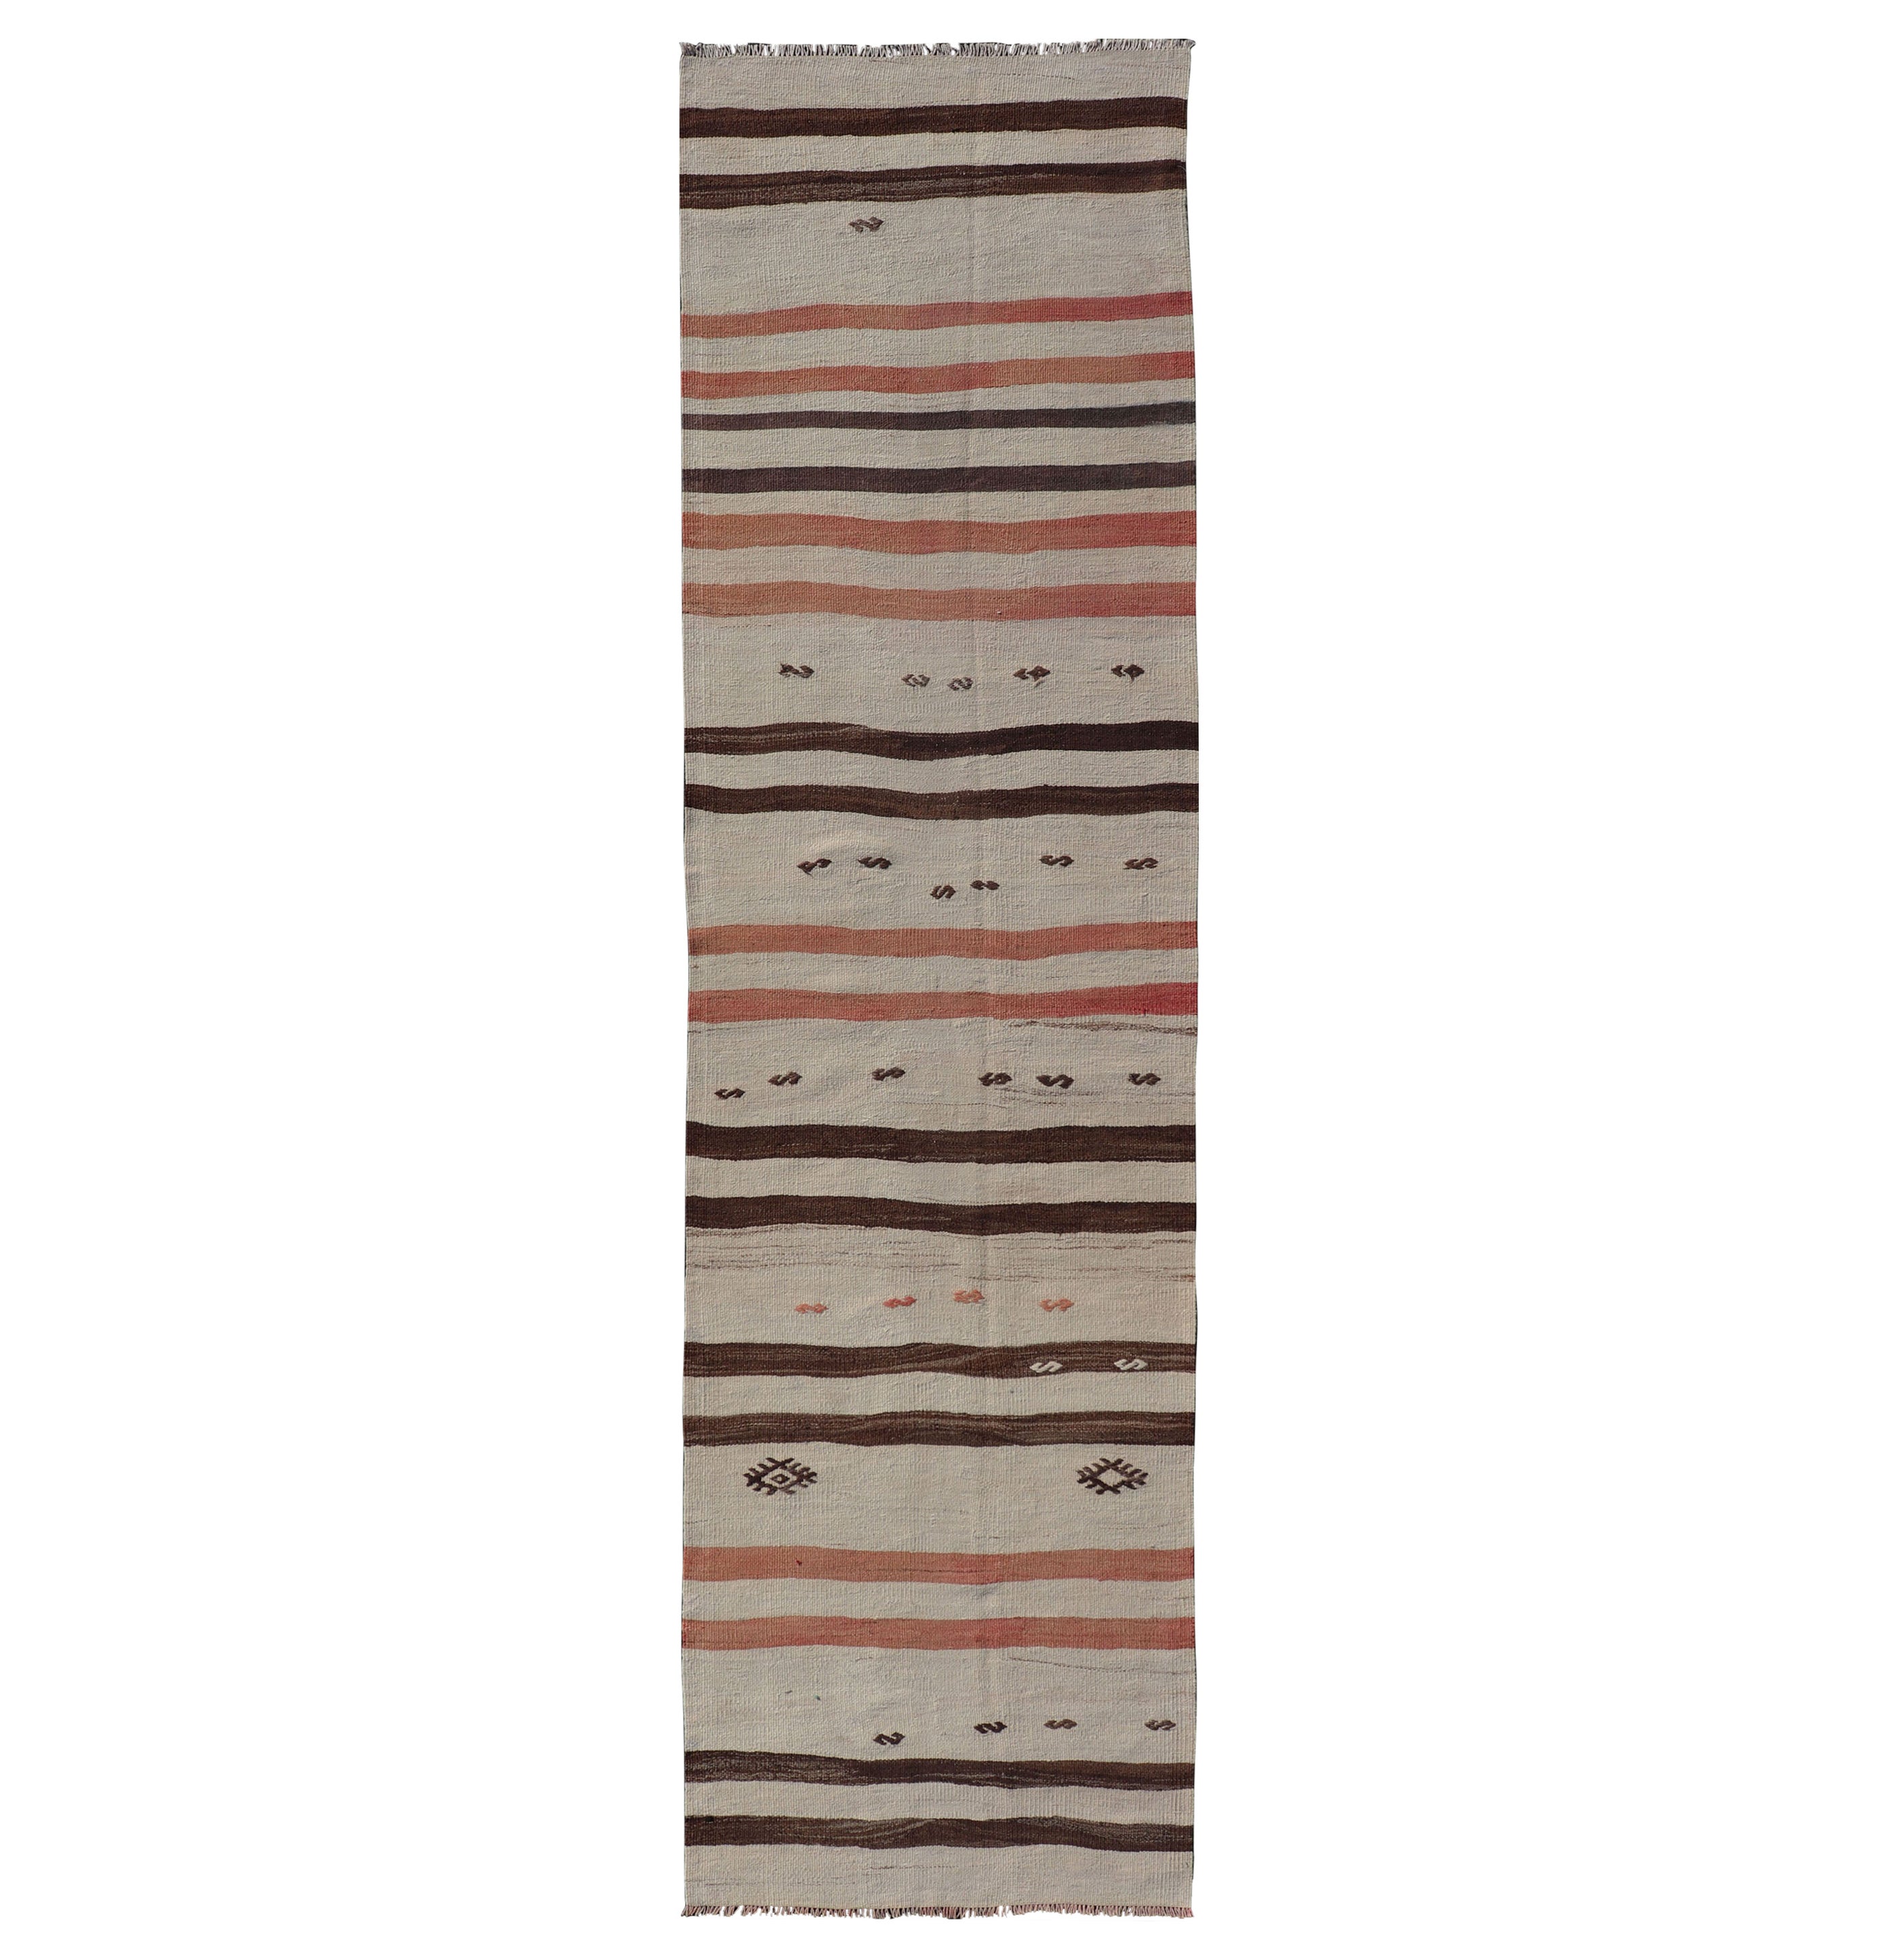 Vintage Turkish Kilim Runner with Stripes in Cream, Brown & Soft Coral Color For Sale